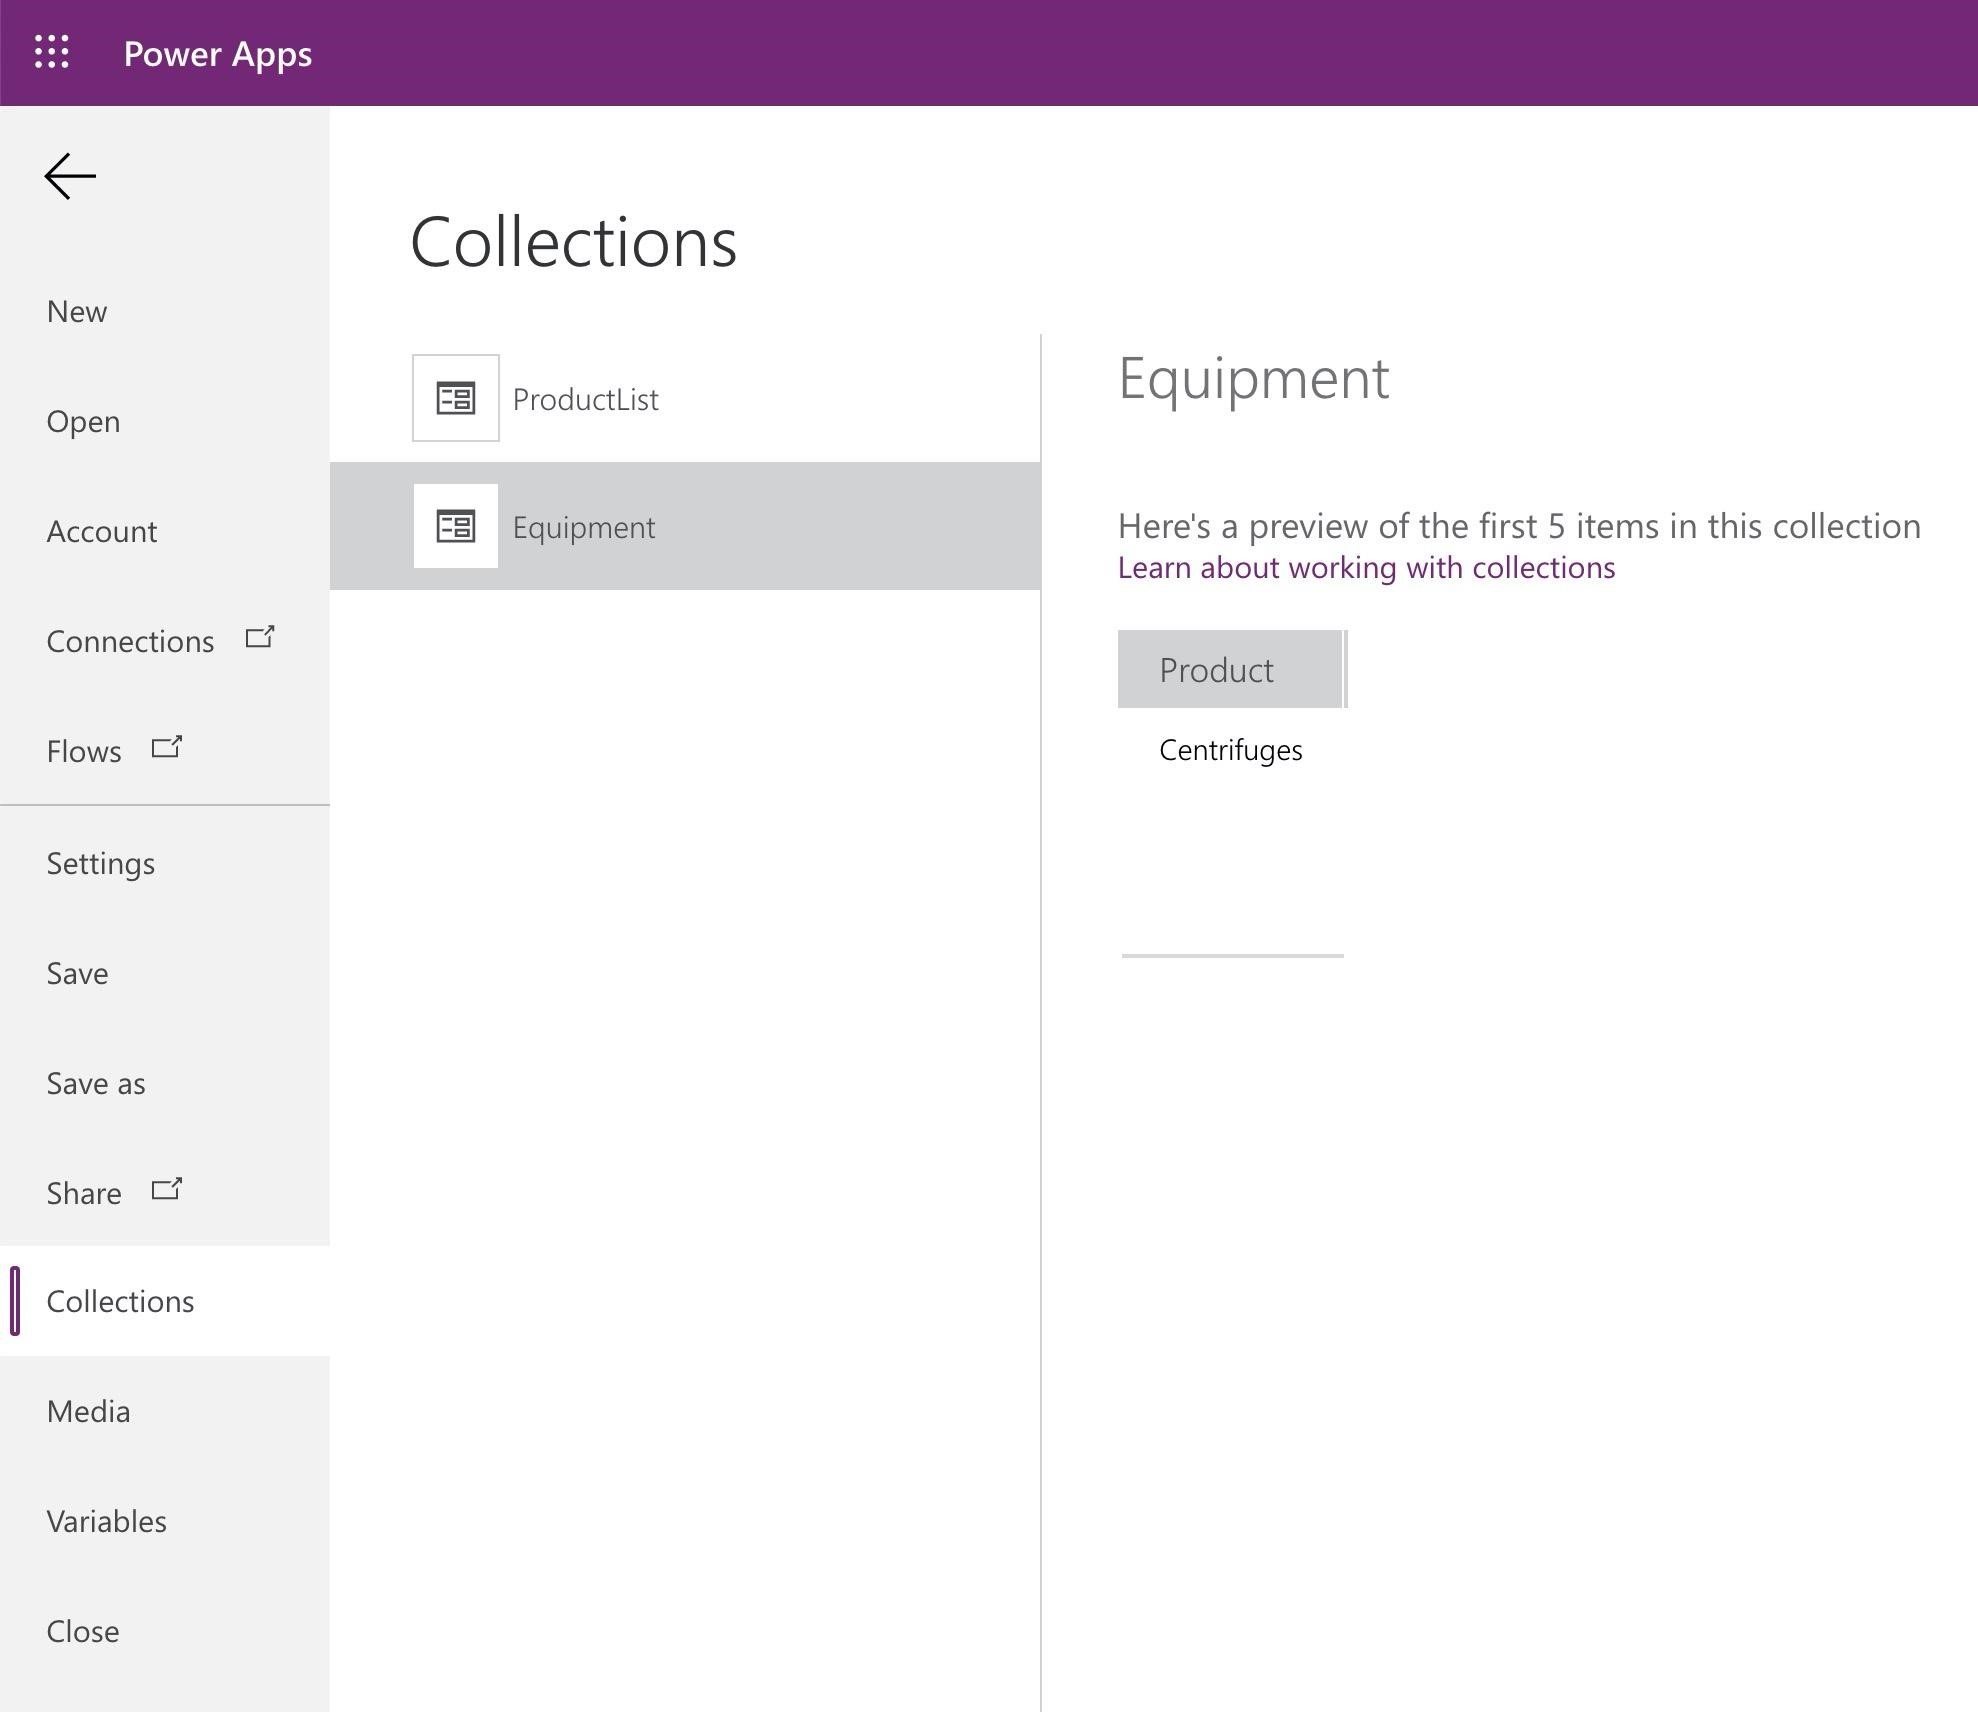 :: Power Apps

°
°

<<
Collections

New
ProductList Eq ul pment
Open
Account Equipment Here's a preview of the first 5 items in this collection

Learn about working with collections

Connections
Product

Flows Centrifuges

Settings

Save

Save as

Share Cf

Collections

Media

Variables

Close